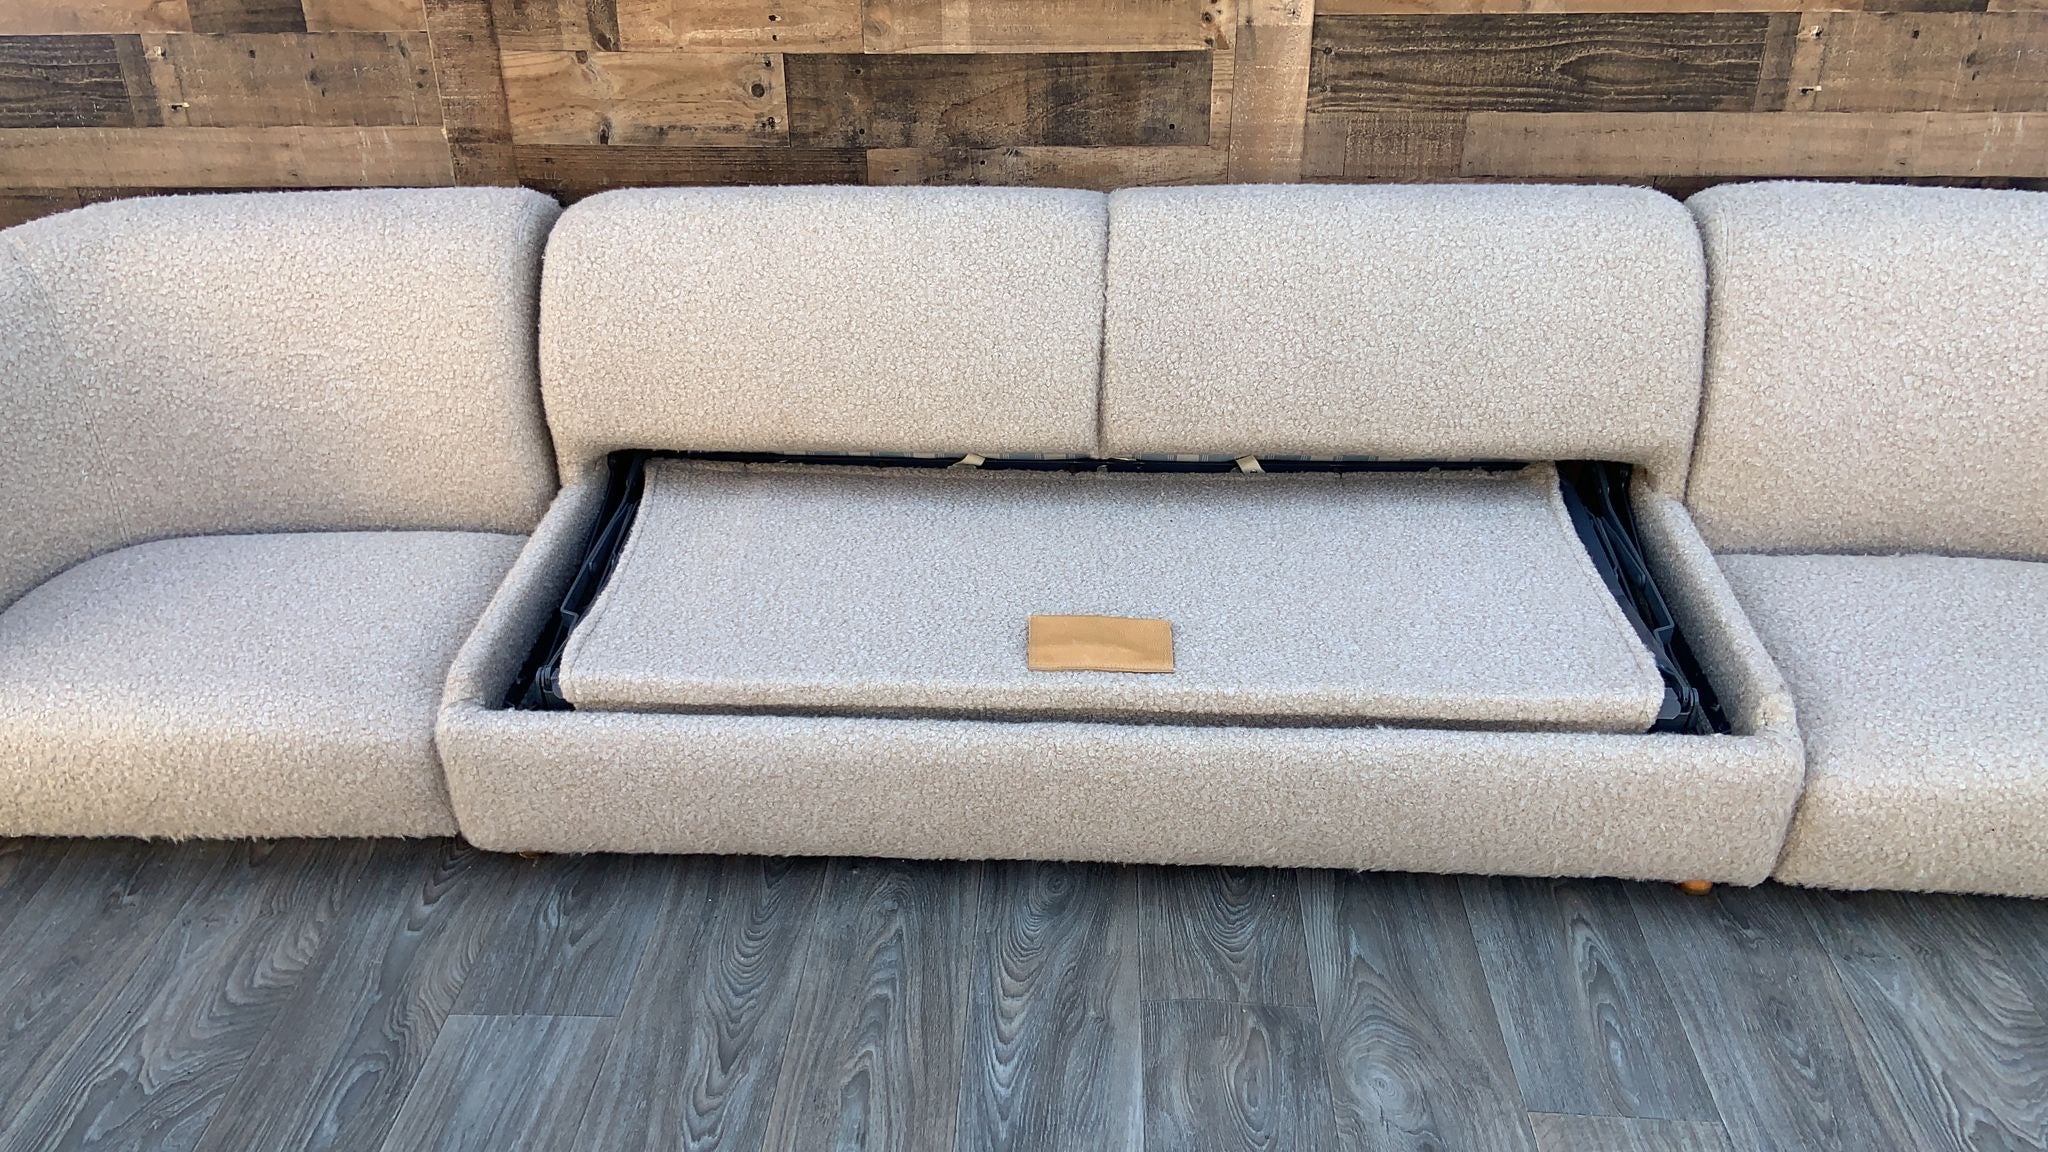 Vintage Mid Century Modern Karpen Sofa with Pullout Bed Retro Chic Furniture Set with Newly Upholstered Cushions!